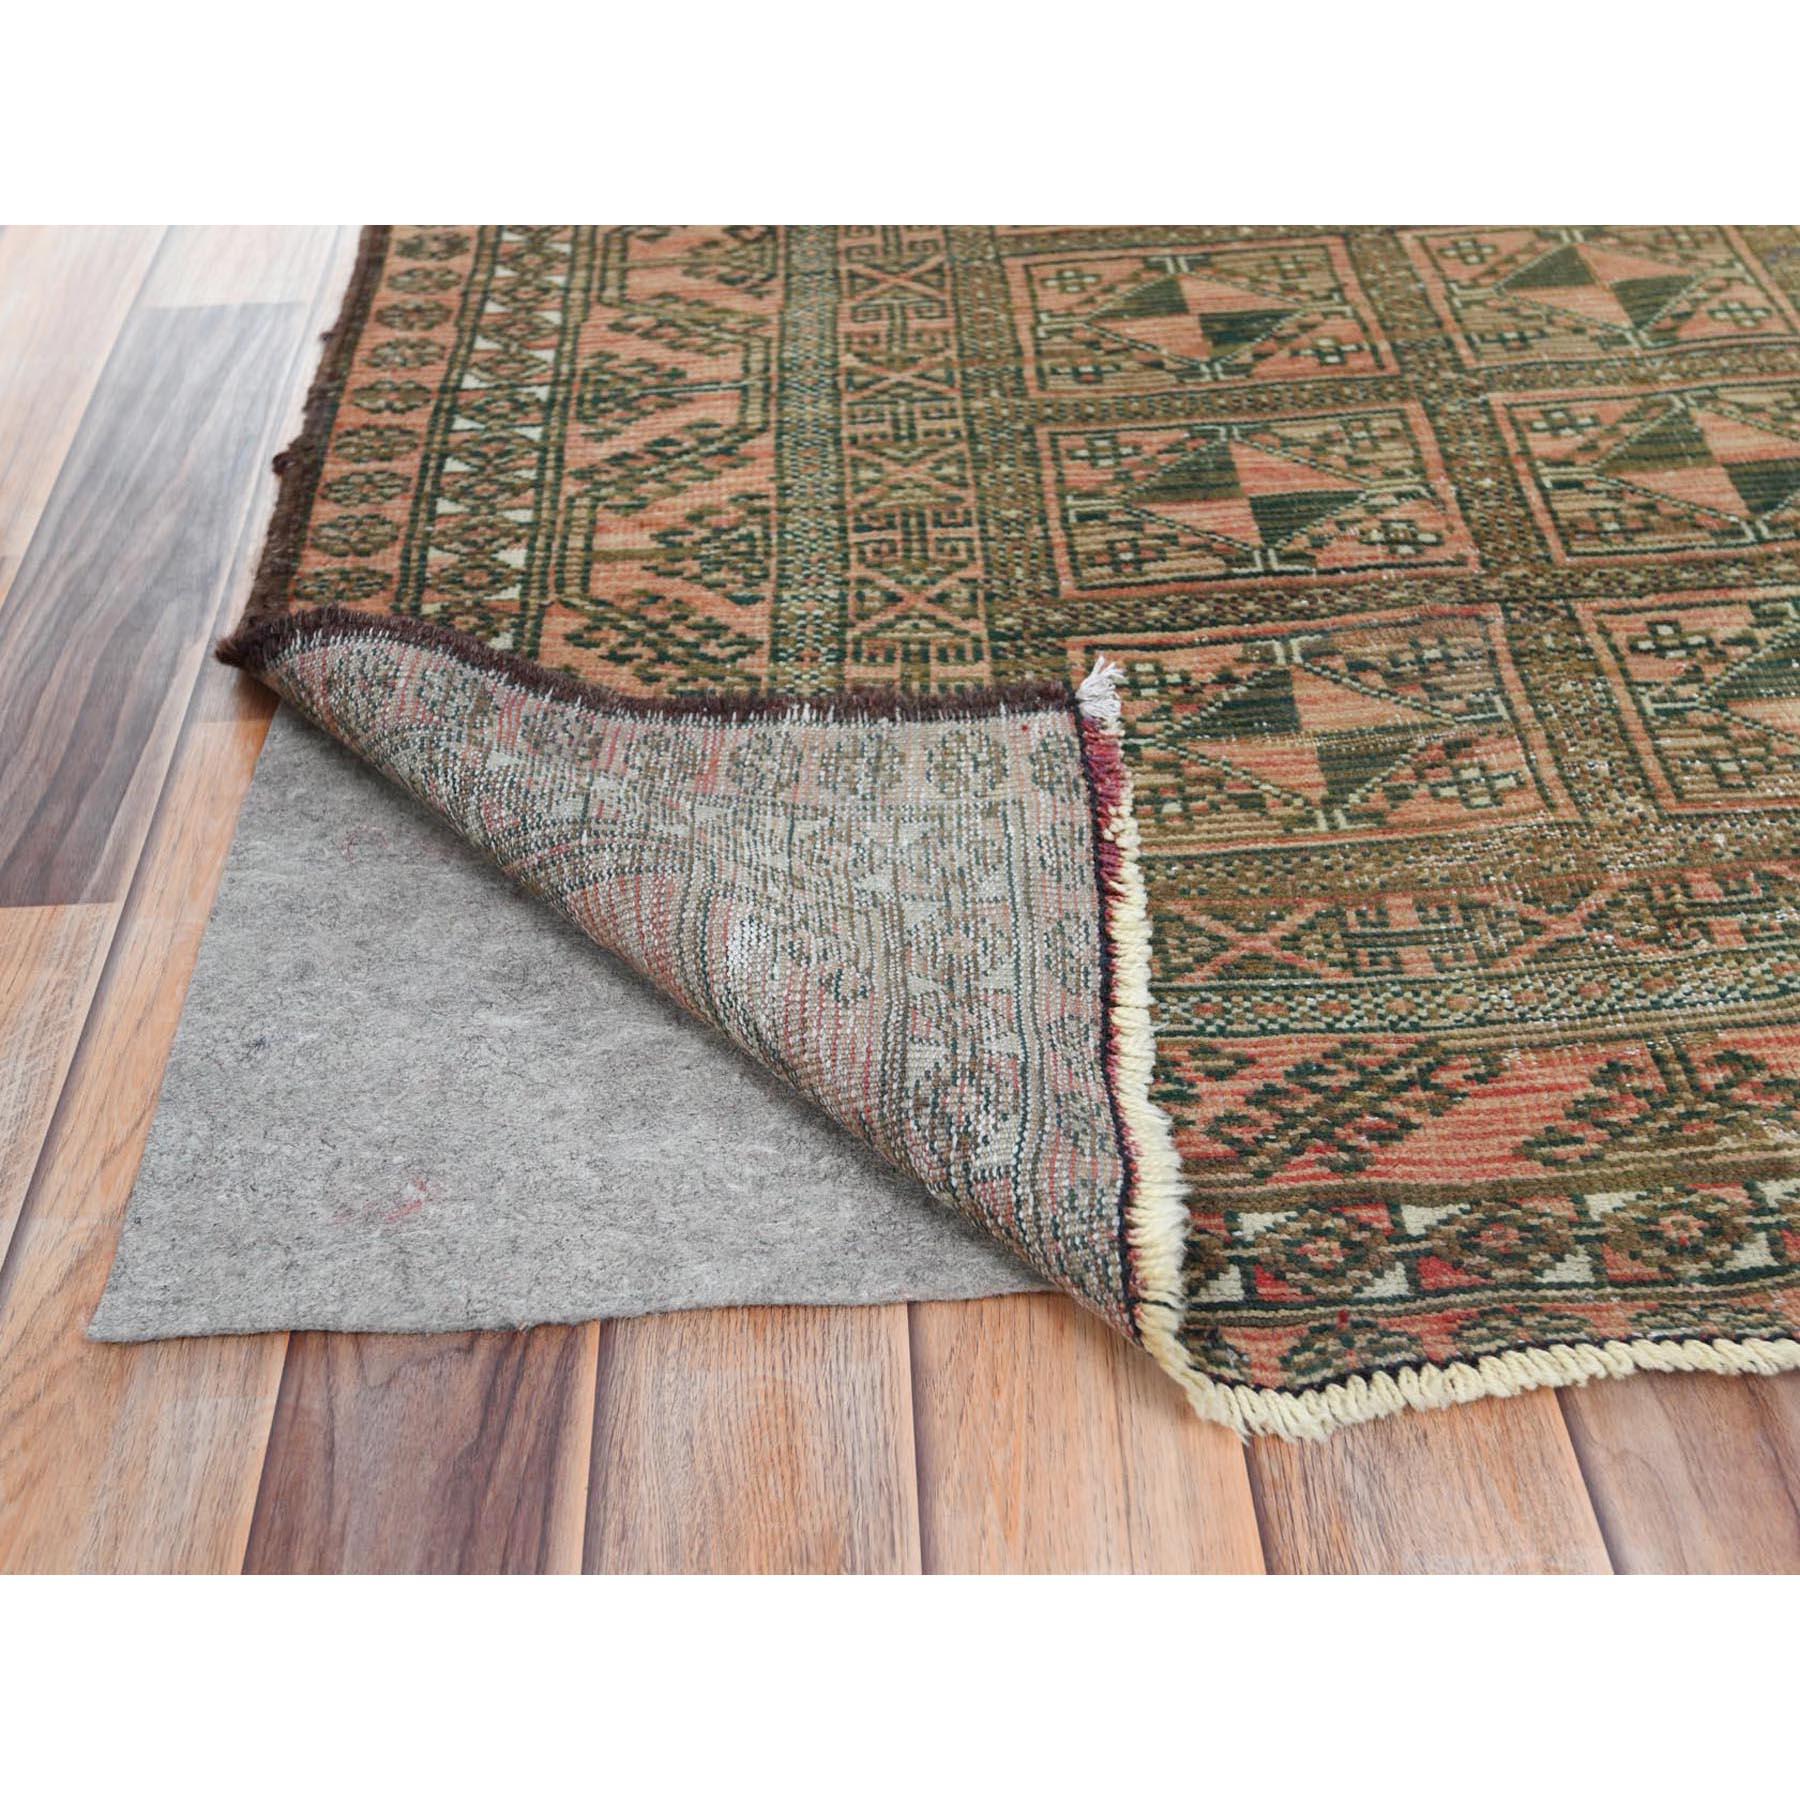 Medieval Peach Color Vintage Persian Baluch Distressed Look Worn Wool Hand Knotted Rug For Sale